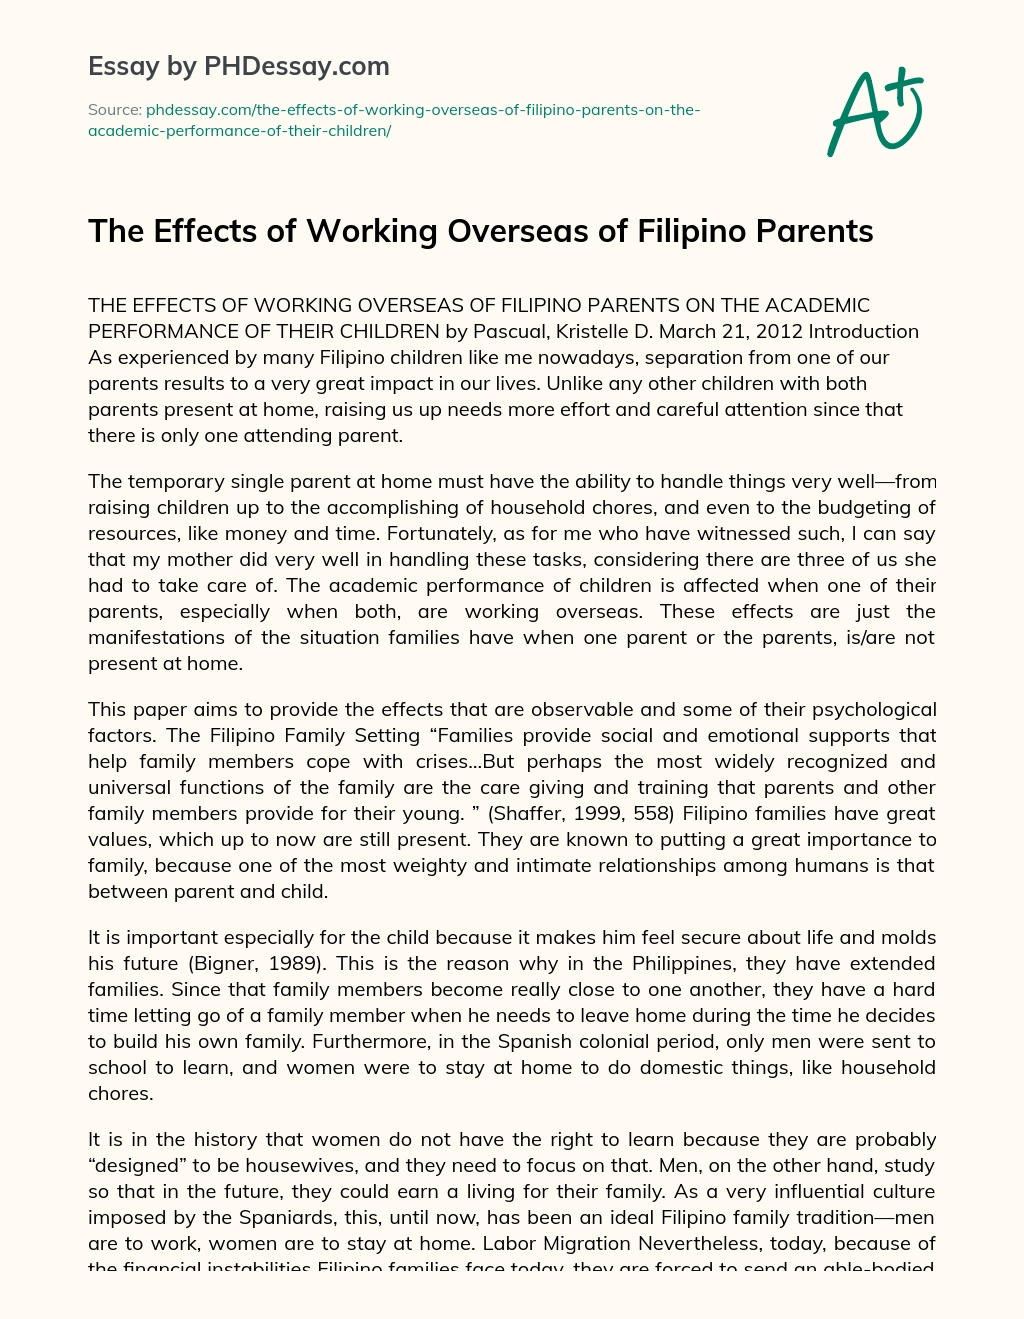 The Effects of Working Overseas of Filipino Parents essay